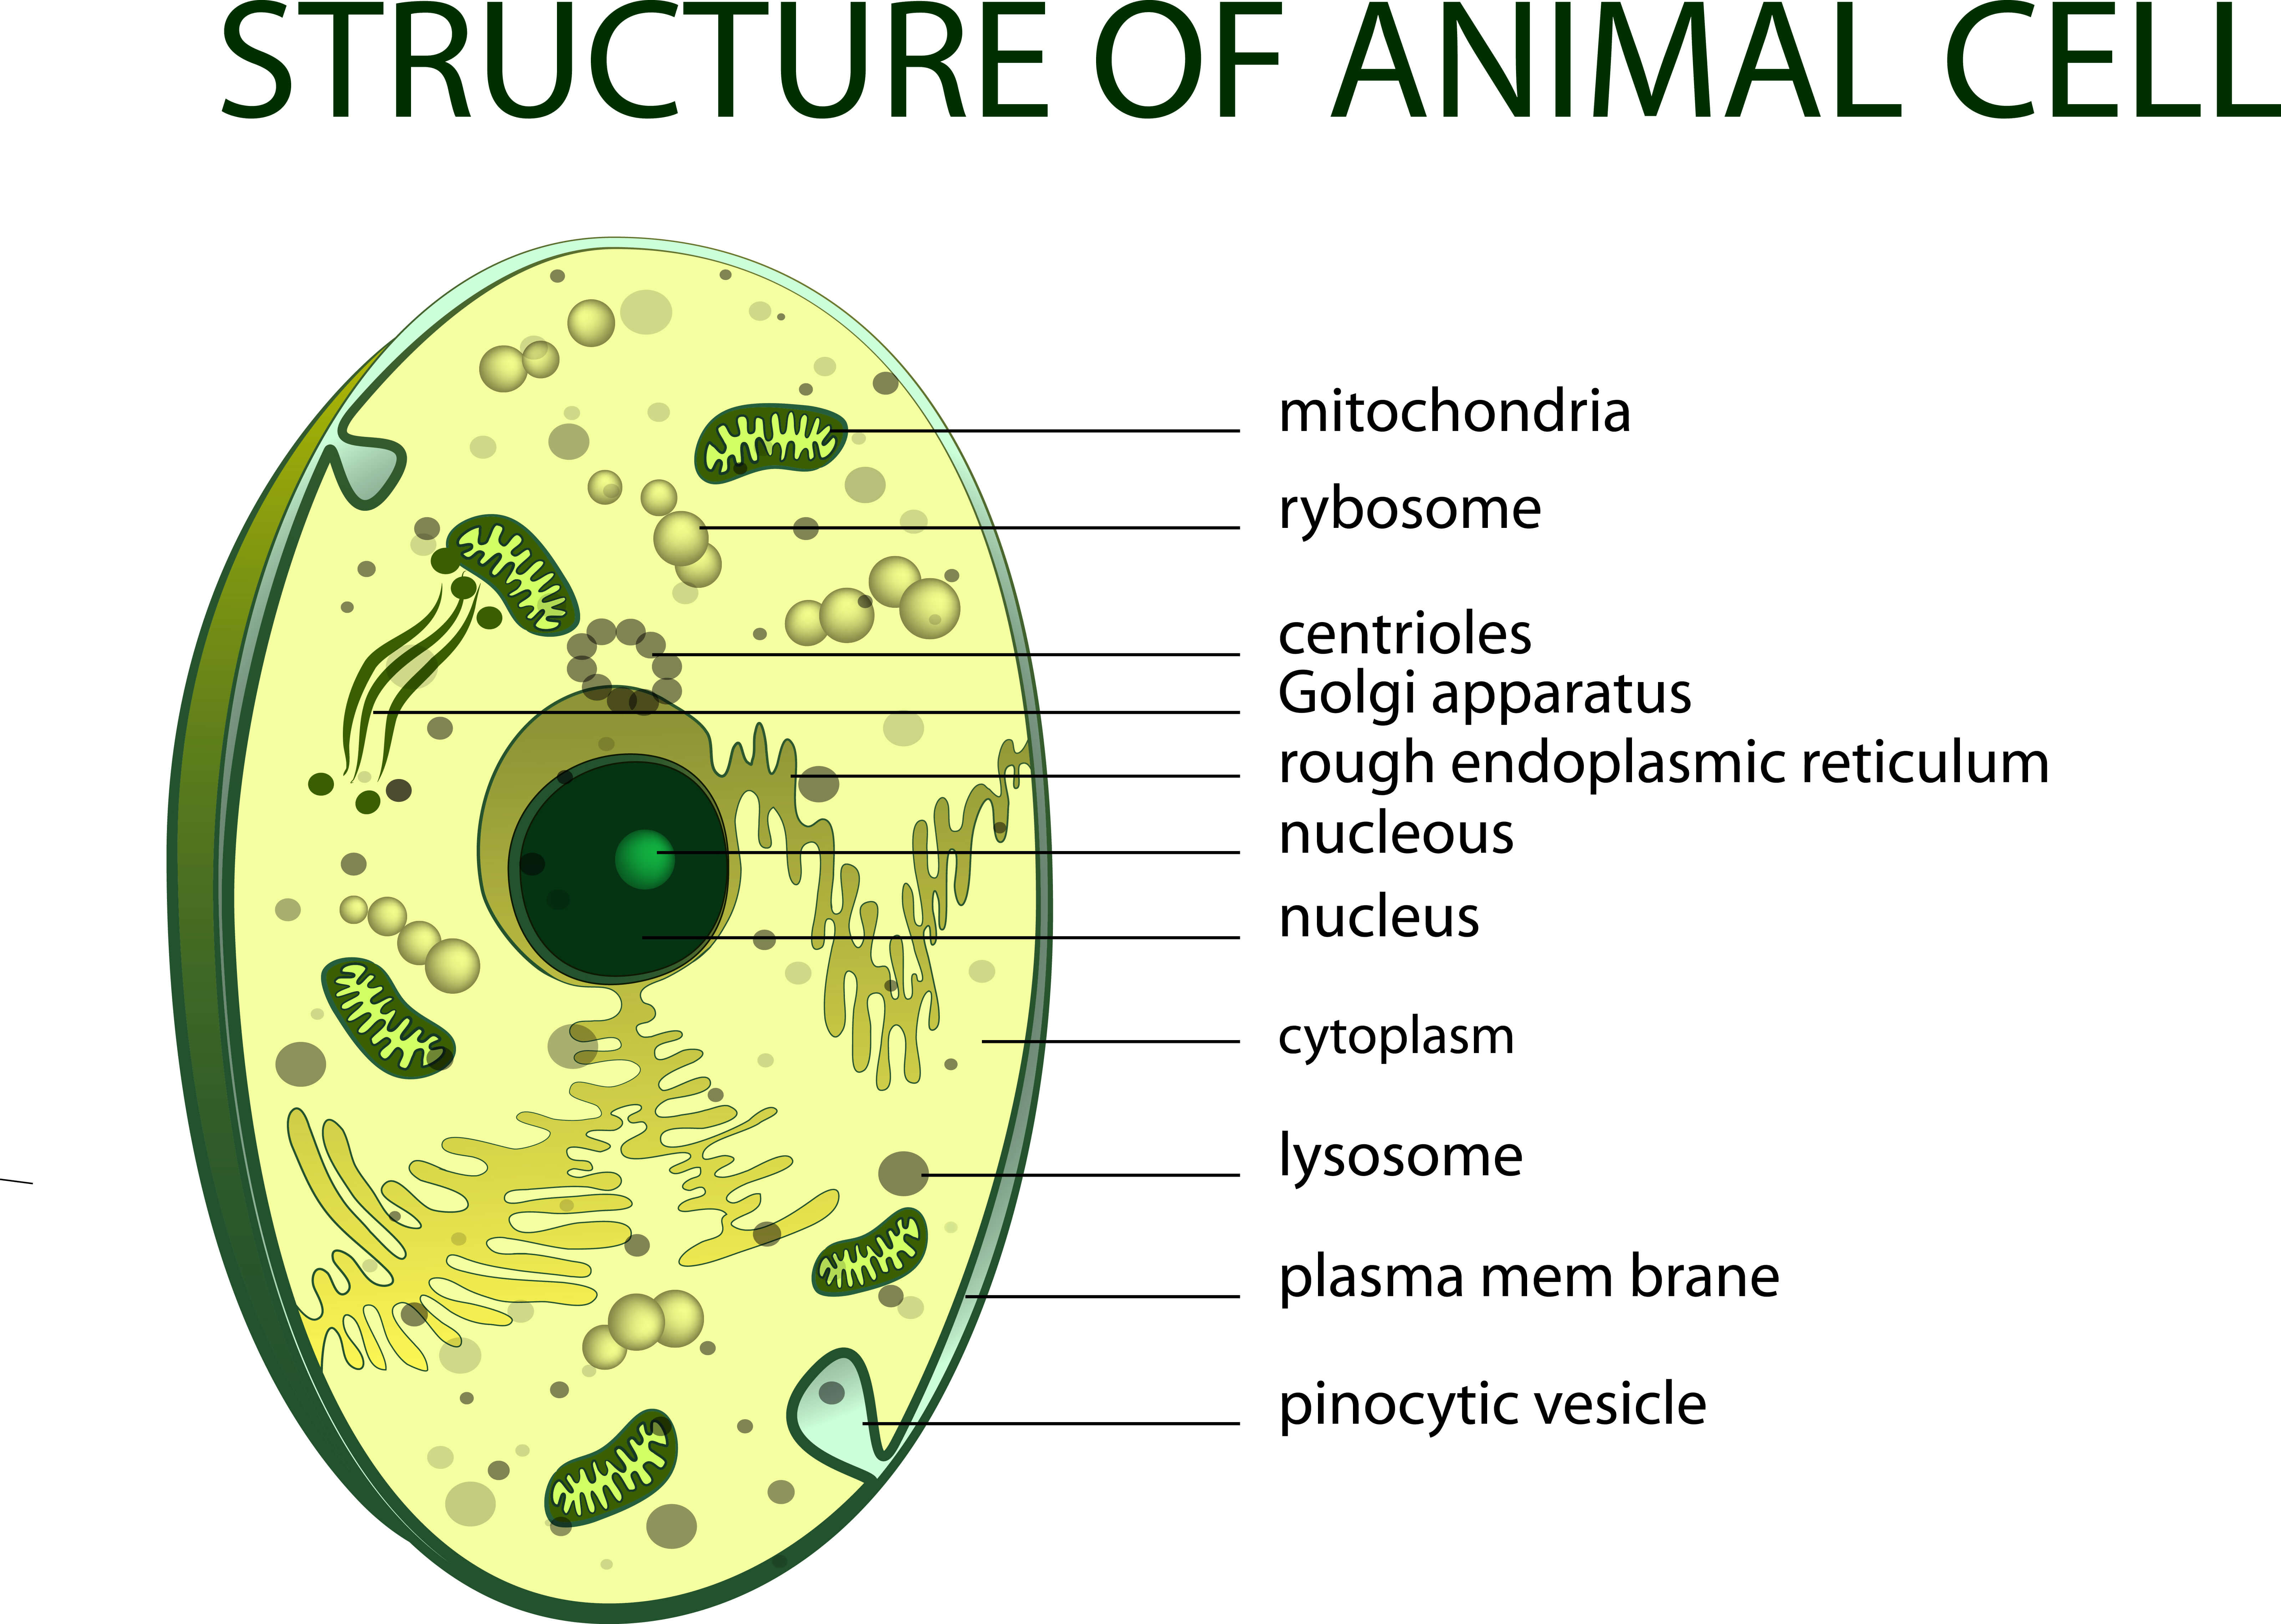 The structure of a cell from a multicellular animal. Photo: shutterstock